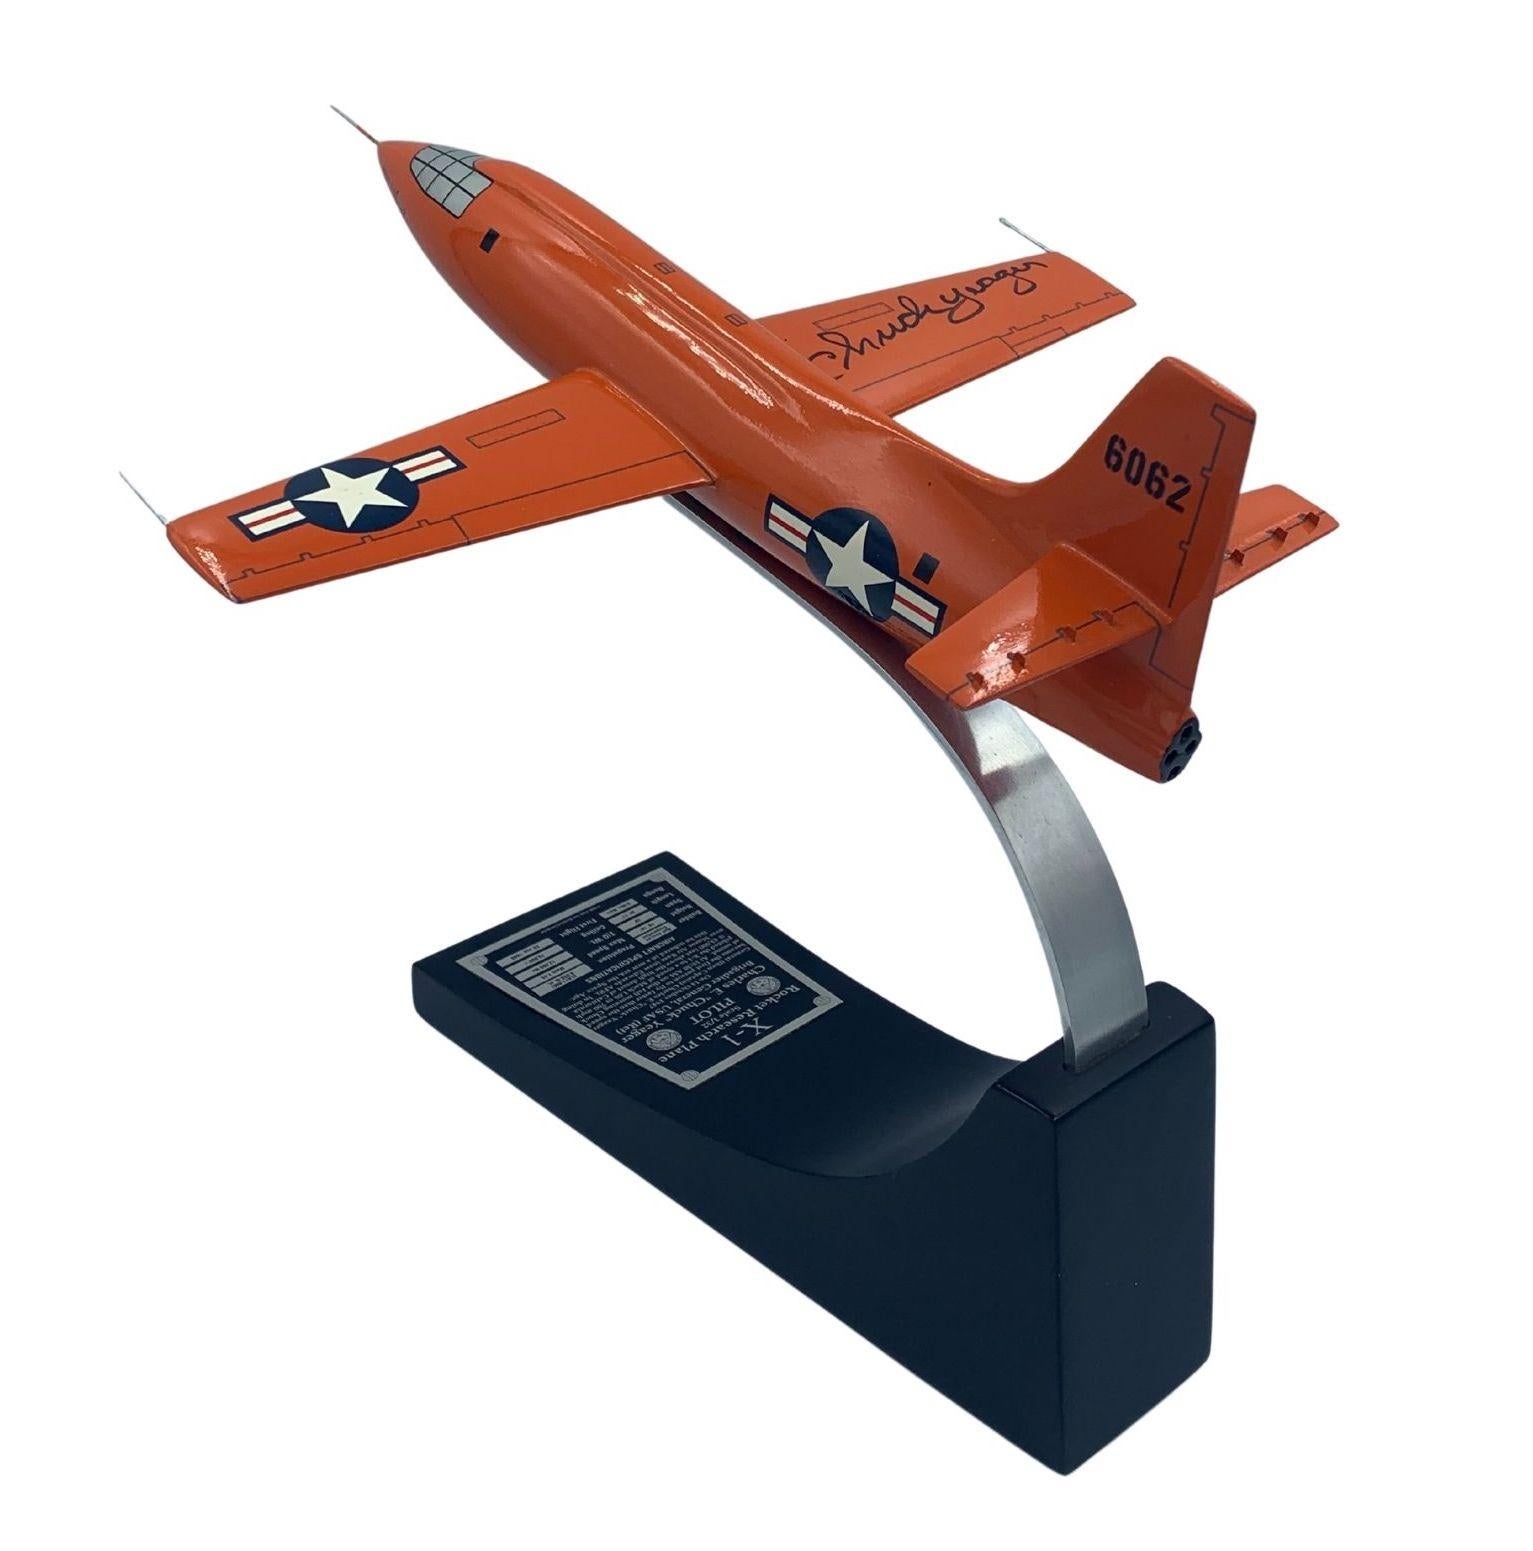 This is a highly collectable Bell X-1 Rocket Research Plane model, signed by the famous pilot Charles “Chuck” Yeager. On October 14, 1947, Air Force Captain Charles E. Yeager flew this experimental Bell X-1 on the first flight faster than the speed